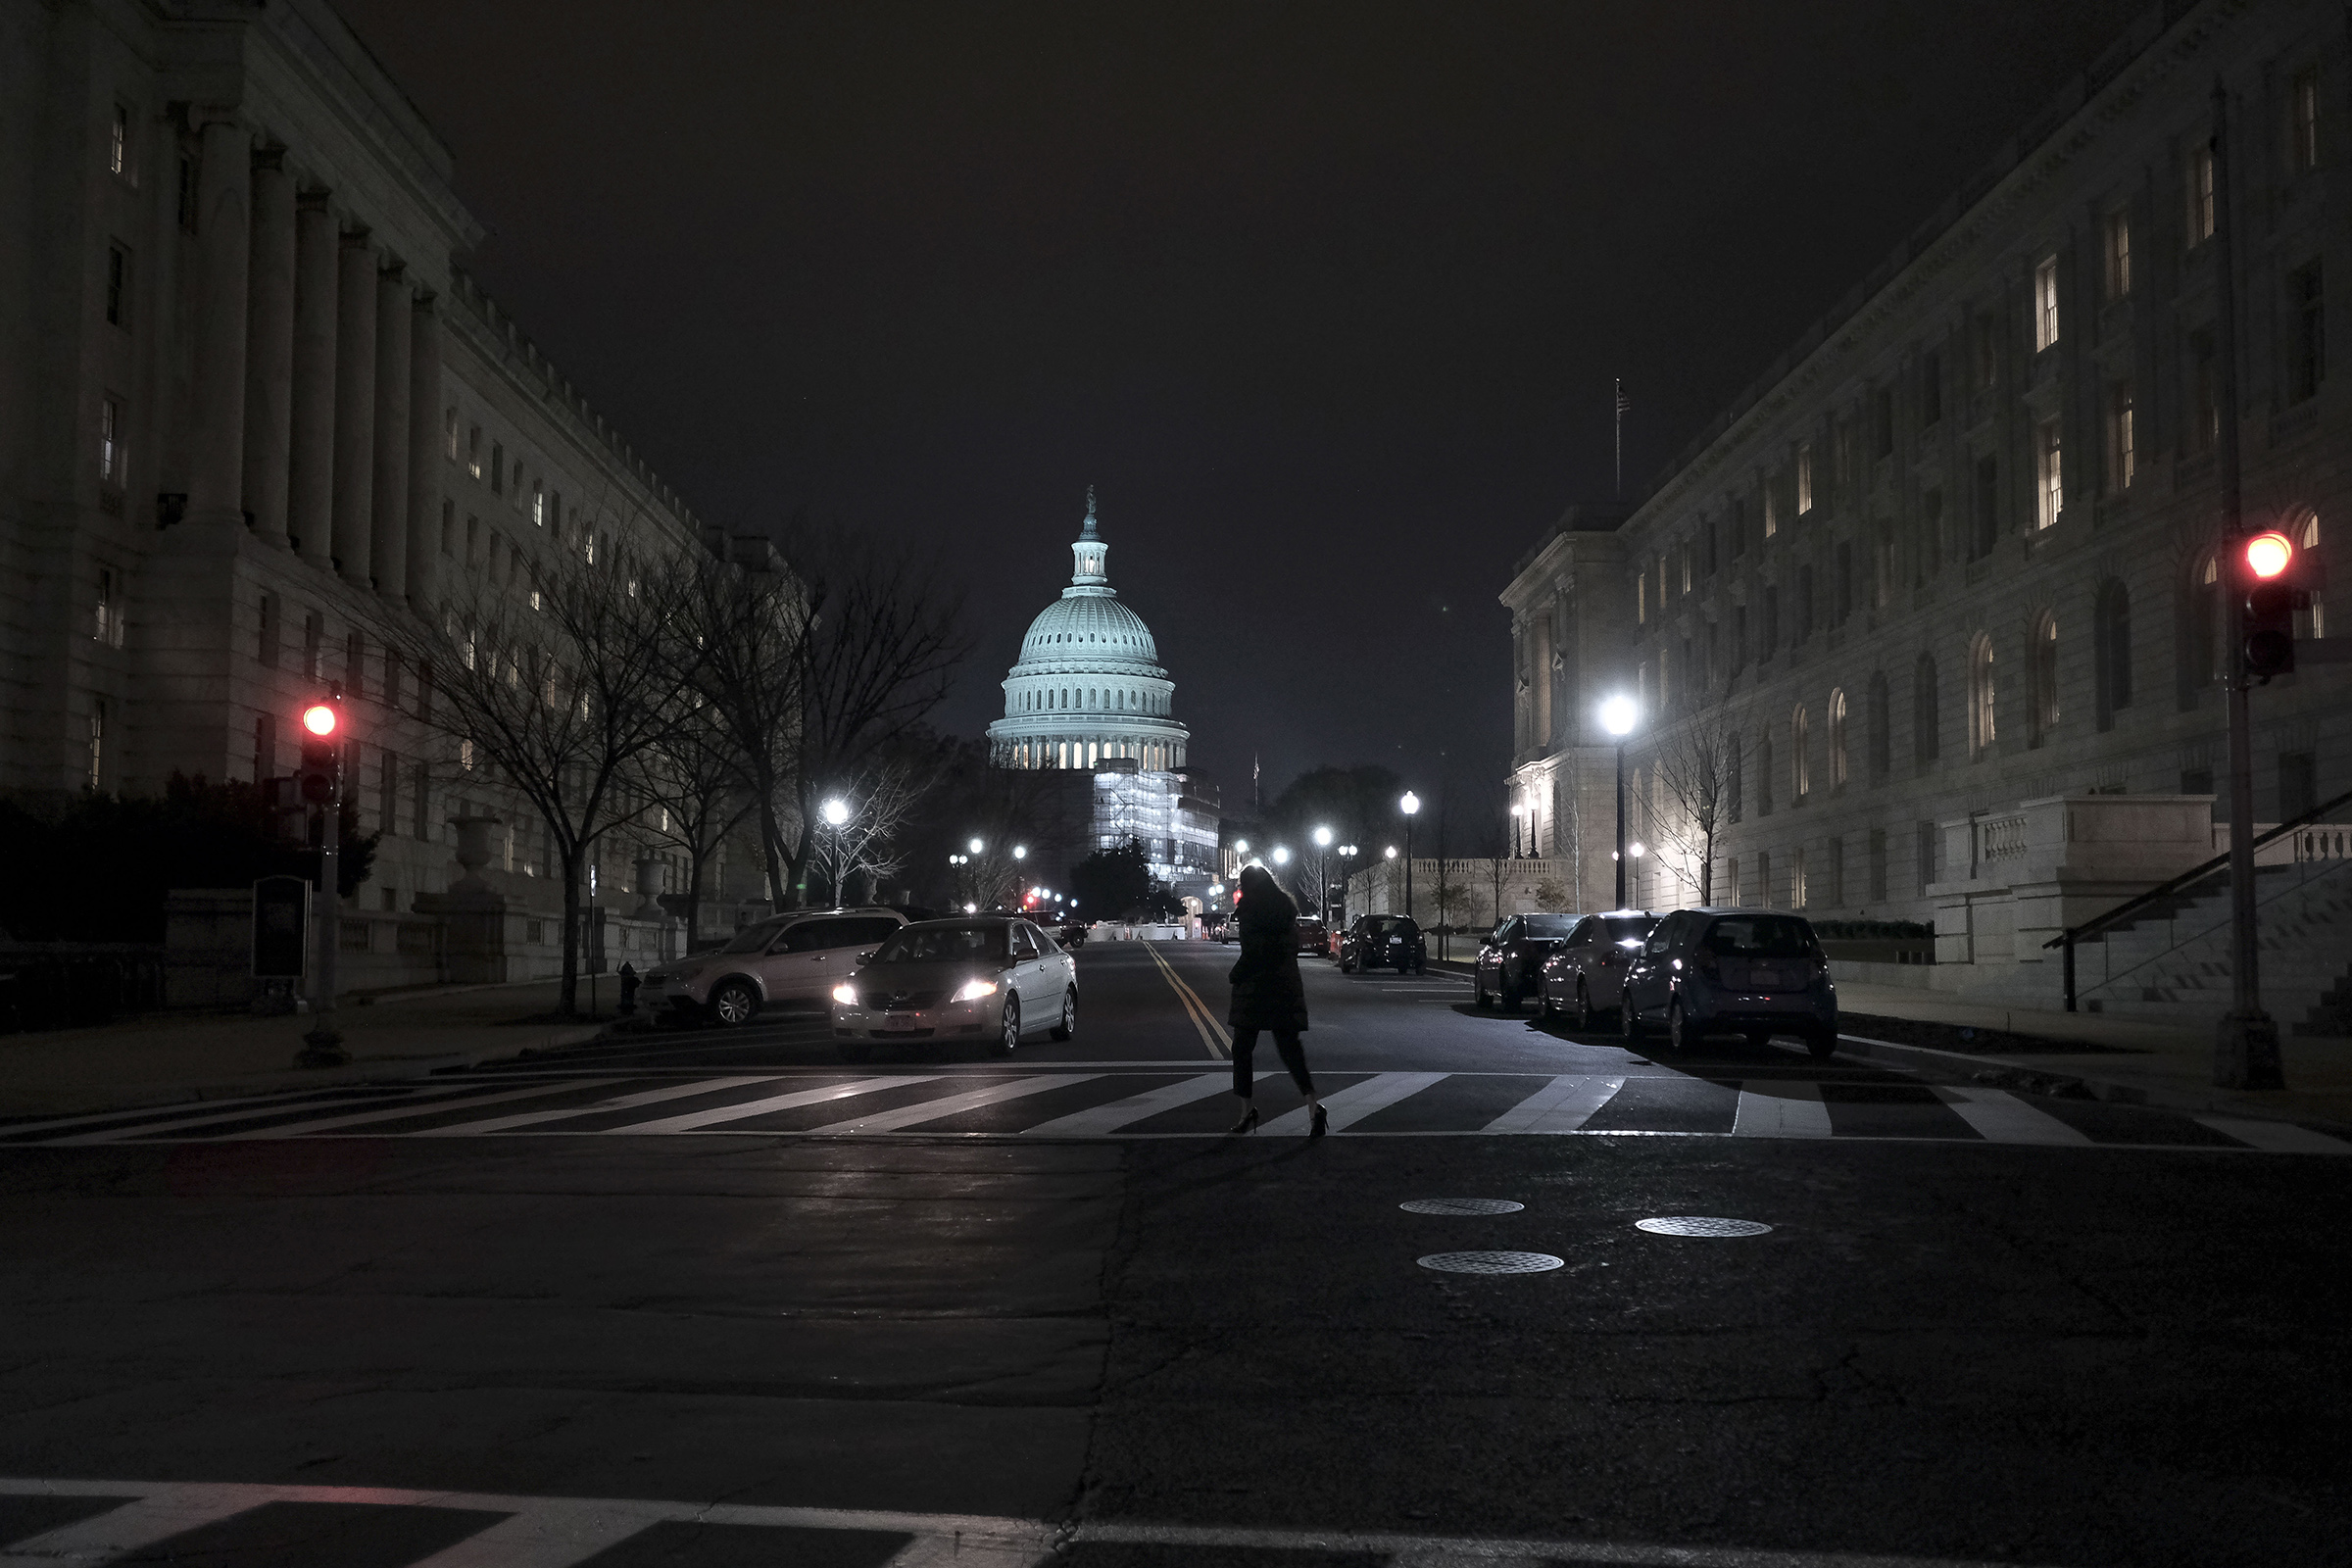 The U.S. Capitol is seen from the Longworth House Office Building where the House Intelligence Committee hearing on the impeachment inquiry is taking place on Capitol Hill in Washington, D.C. on Nov. 20, 2019. (Gabriella Demczuk for TIME)